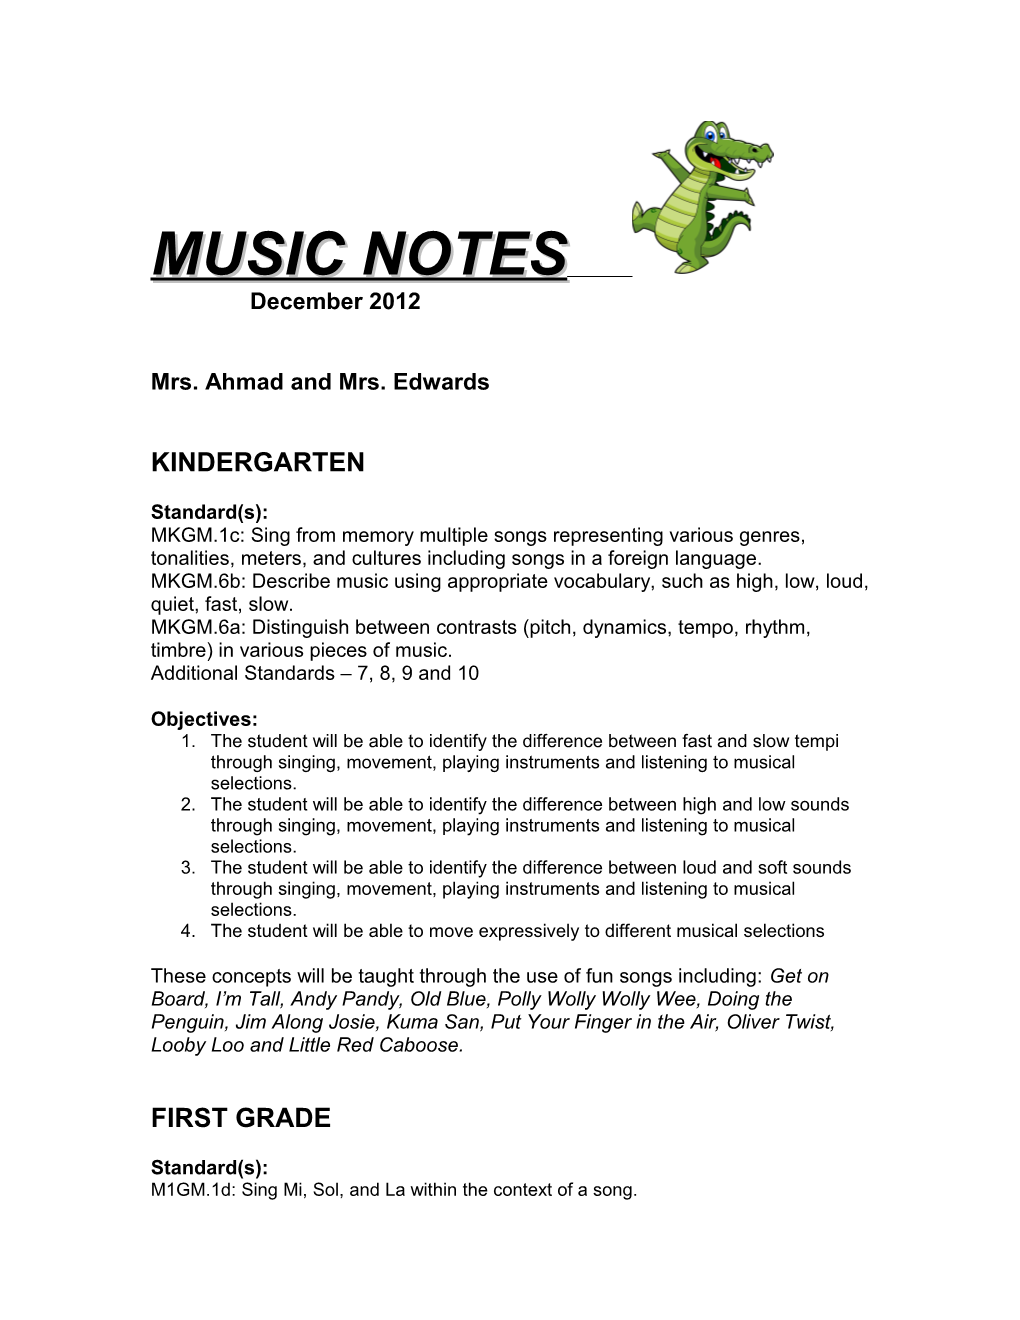 Music Notes Mrs s1